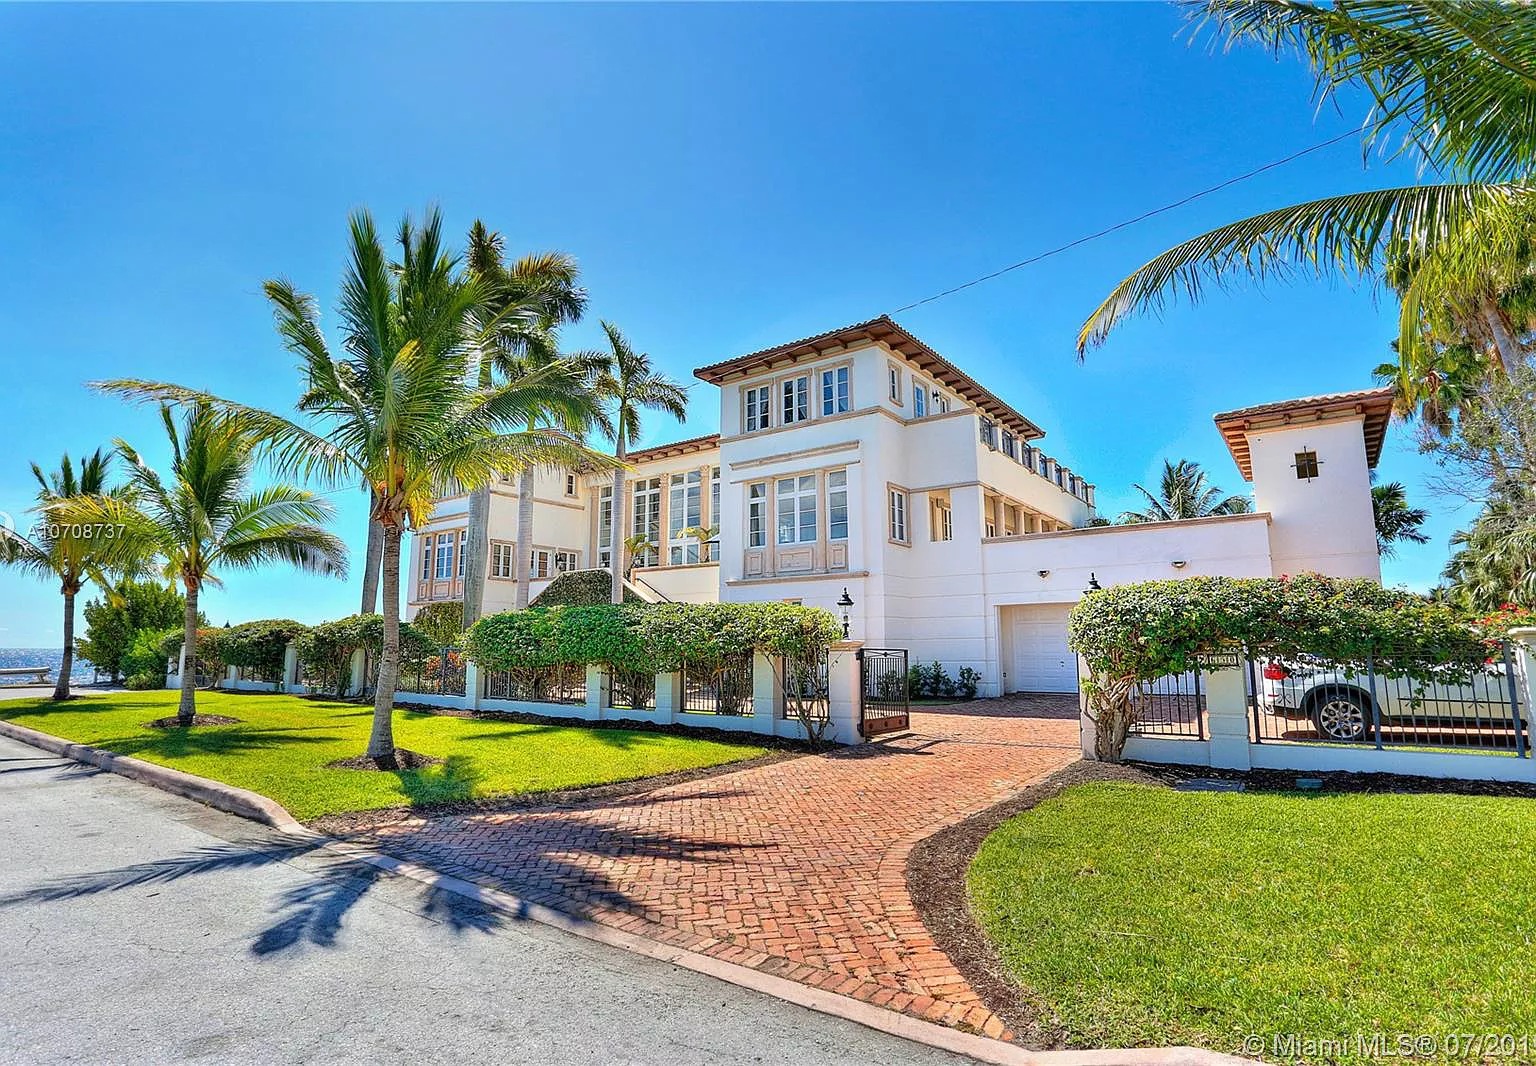 650 Lugo Ave, Coral Gables, FL 33156 - $7,999,000 home for sale, house images, photos and pics gallery